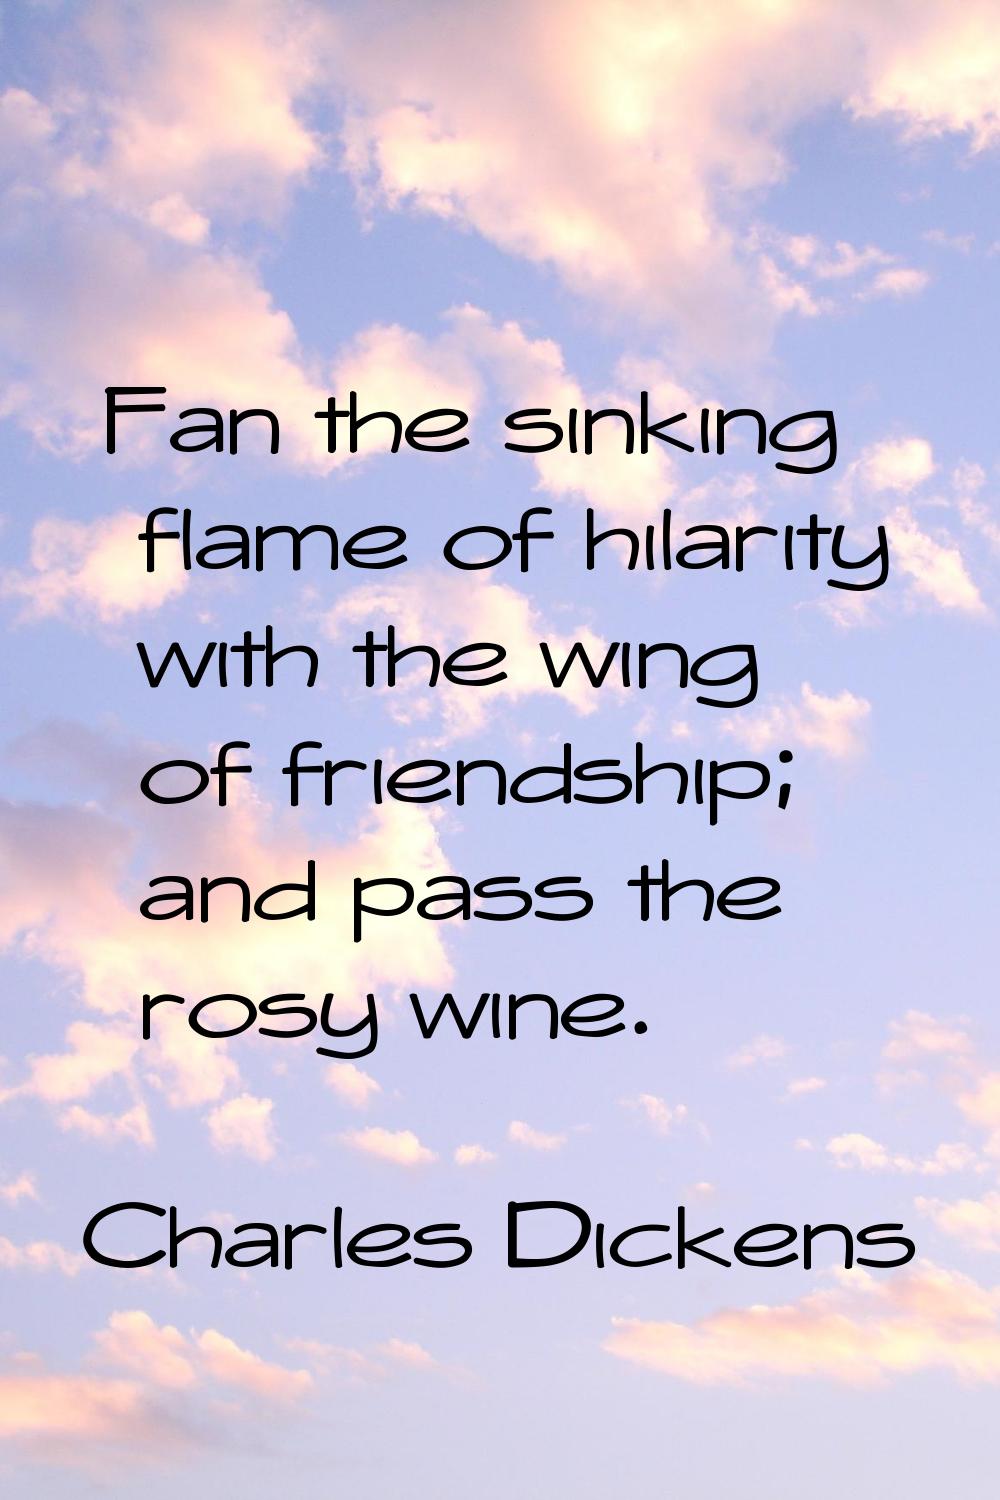 Fan the sinking flame of hilarity with the wing of friendship; and pass the rosy wine.